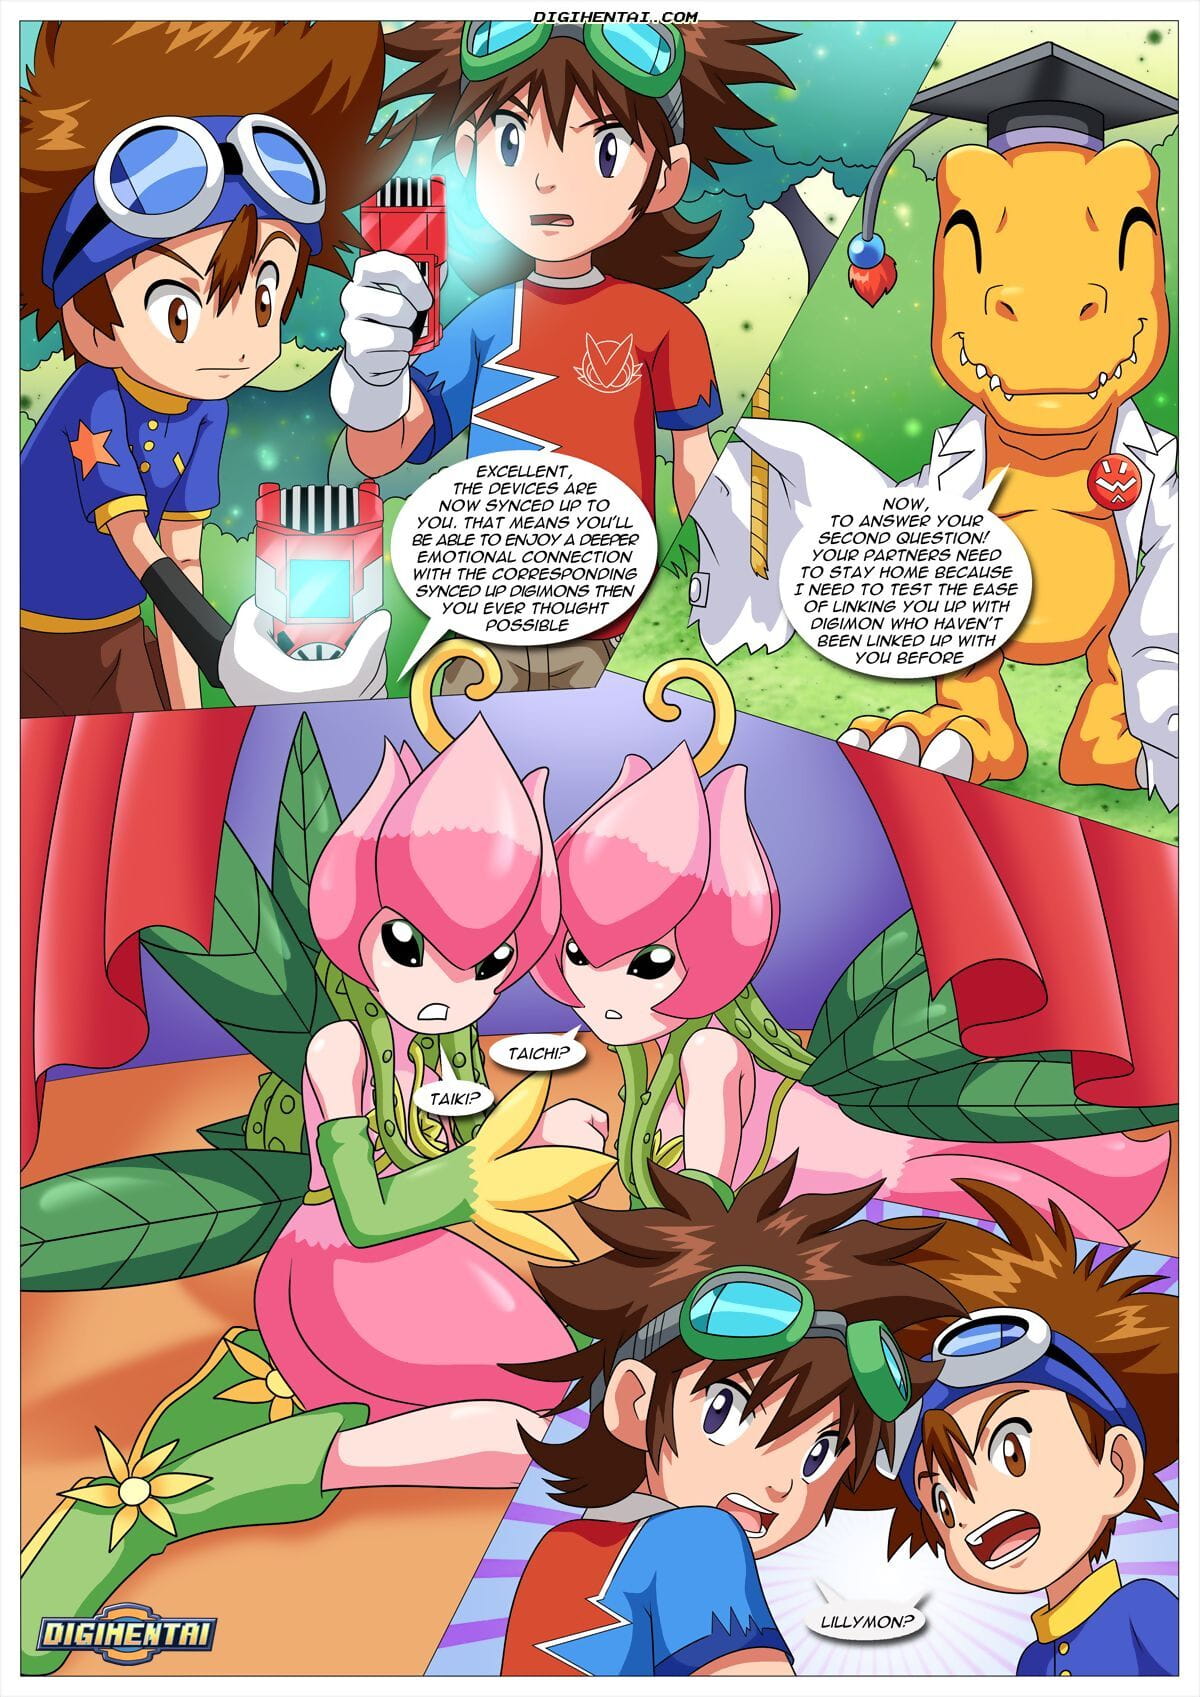 Digimon- Digtal Lovero – Palcomix page 1